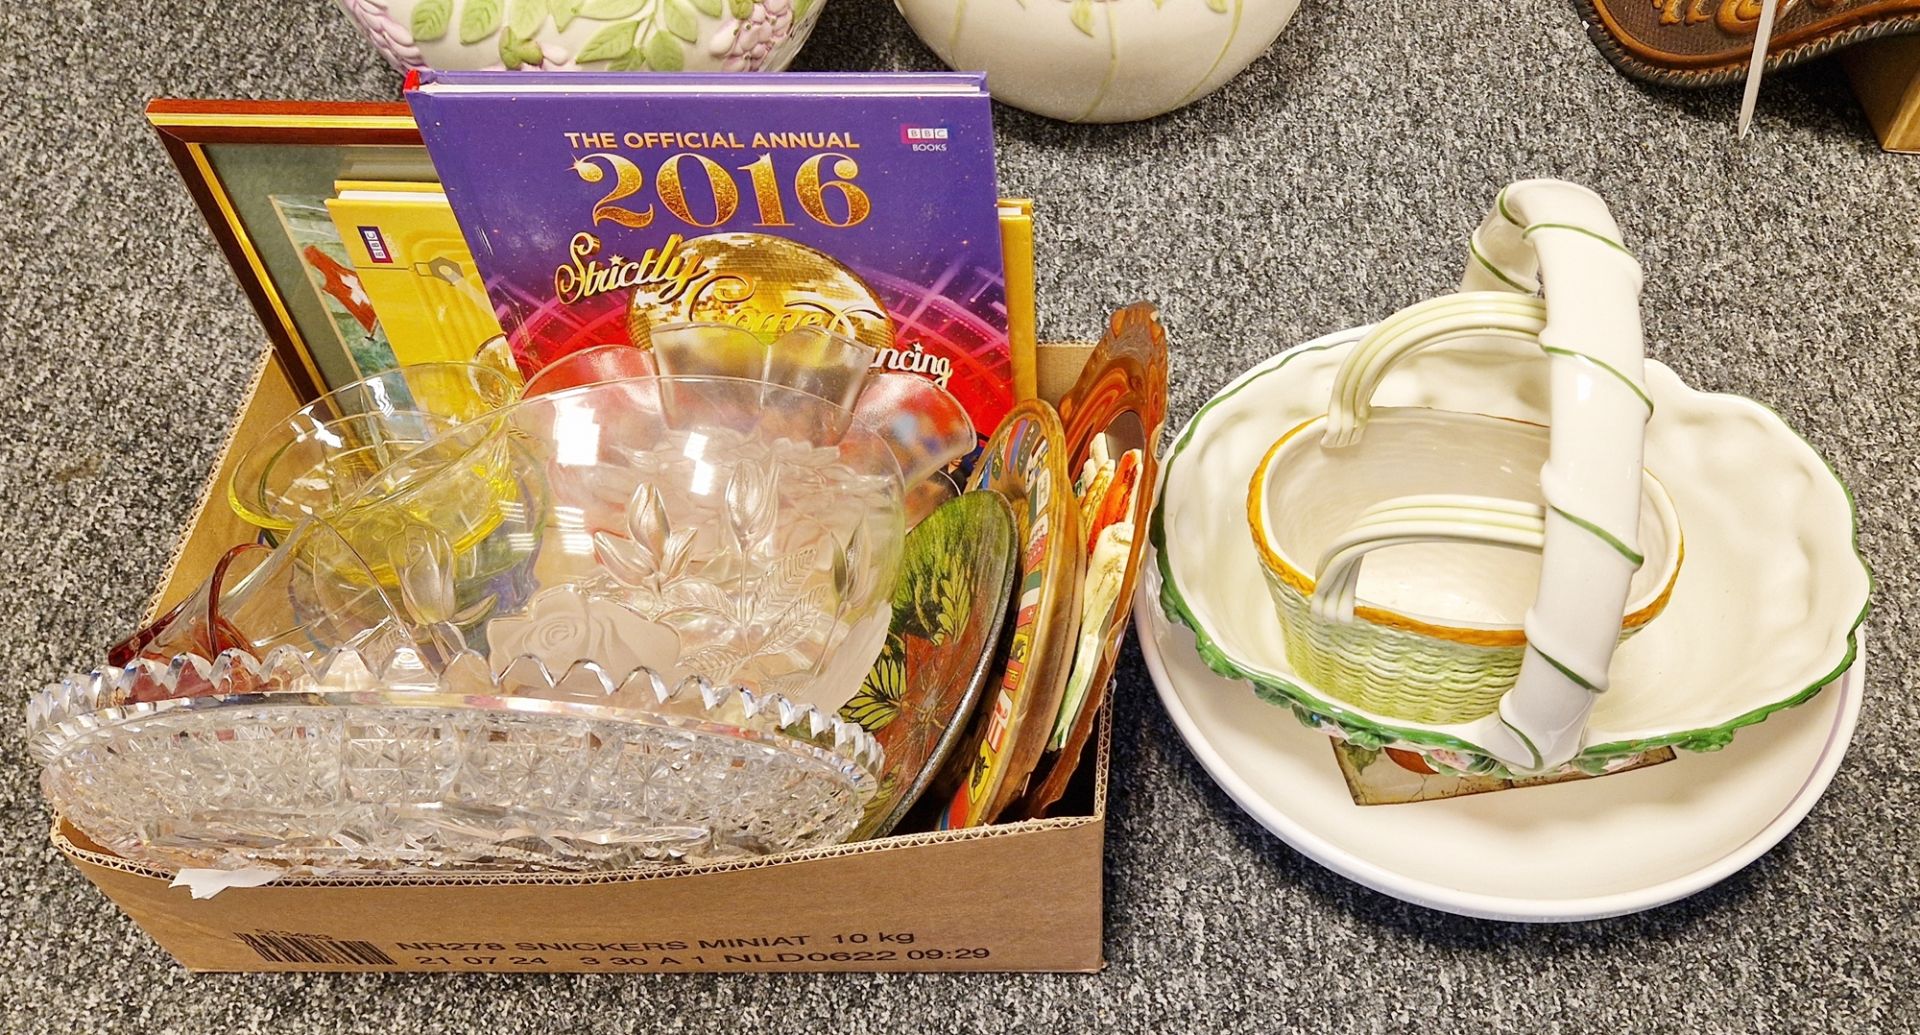 Moulded glass fruit bowl, Strictly Come Dancing album 2016 and other glass items (1 box)